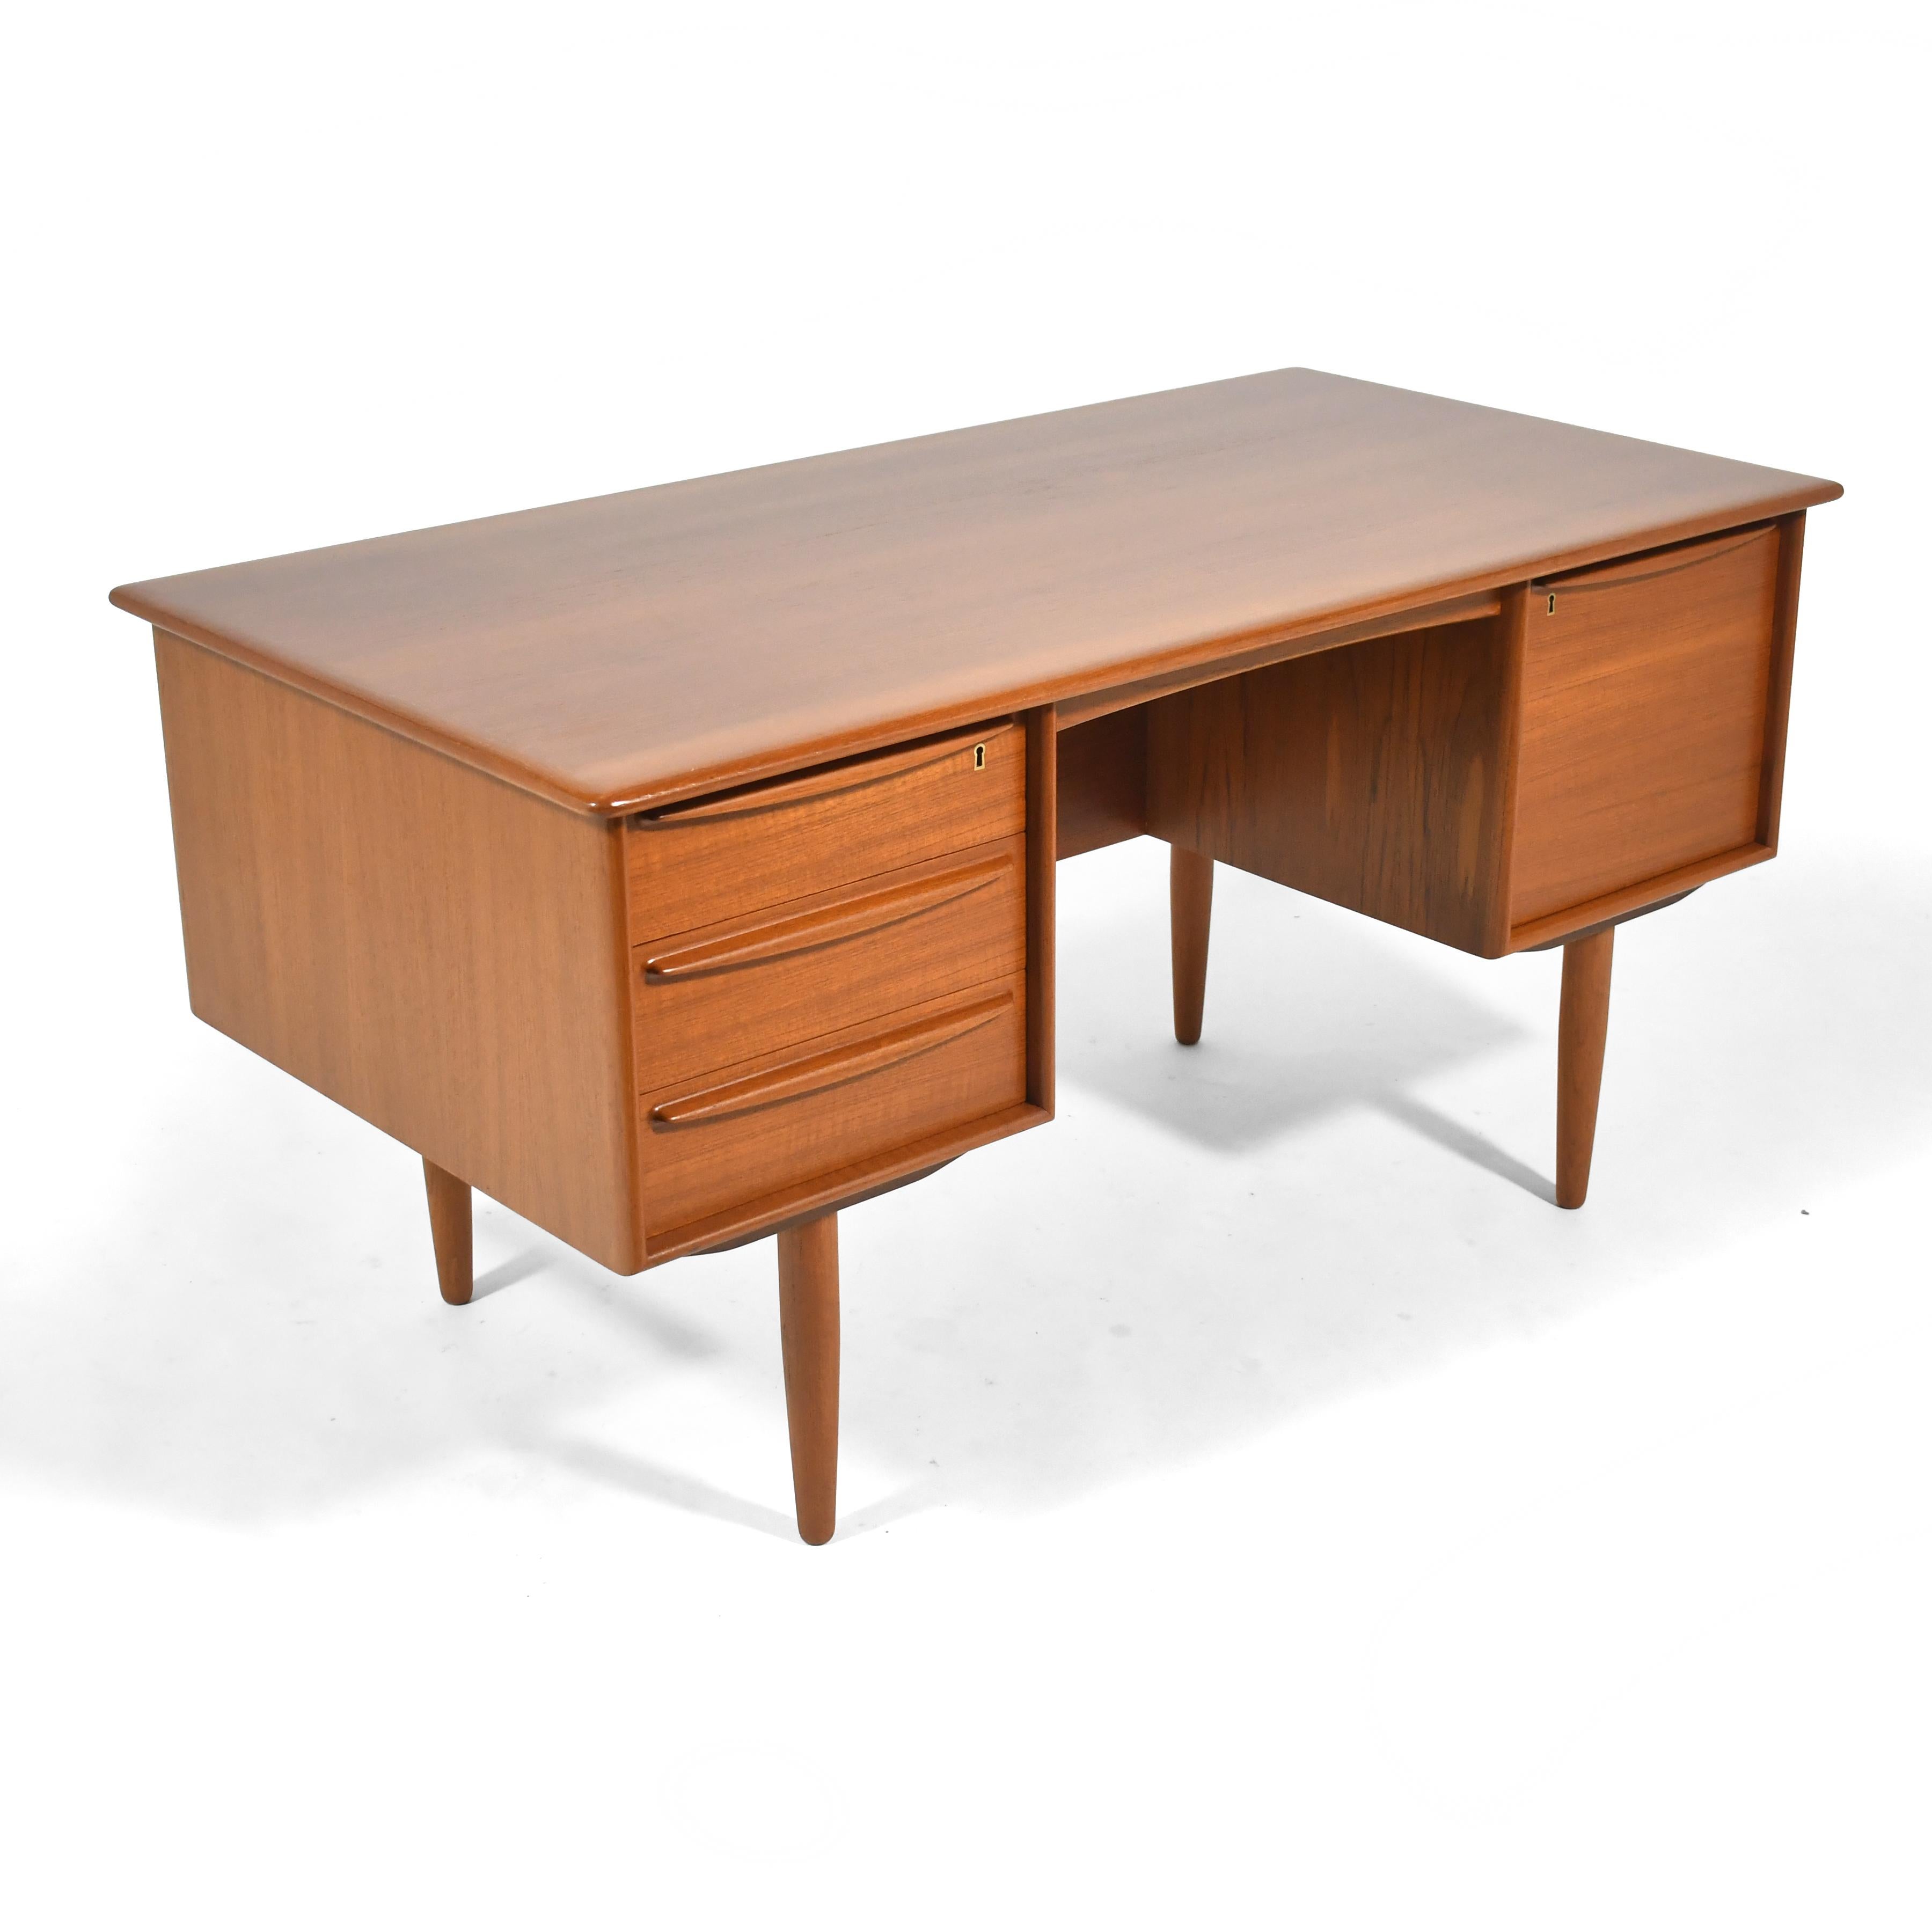 This handsome and incredibly well built Svend Madsen desk by Falster Mobelfabrik has a bank of three shallow drawers on the left and a deep file drawer on the right. The back features a large storage compartment for books or displaying art/